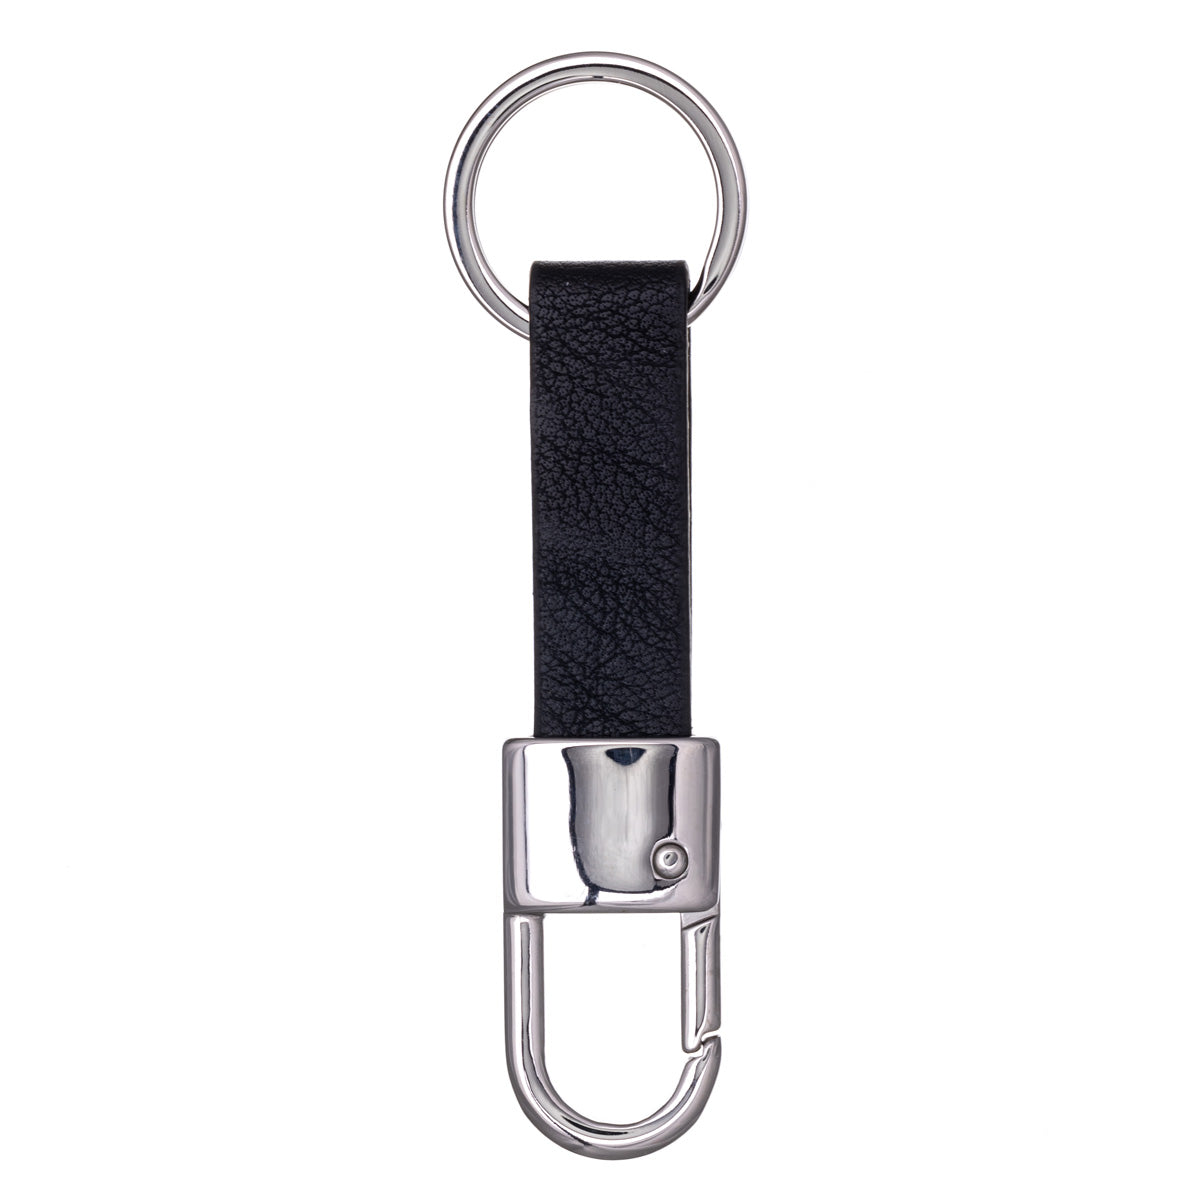 Steel keyring with quick lock carabiner with black strap (Steel 316L)